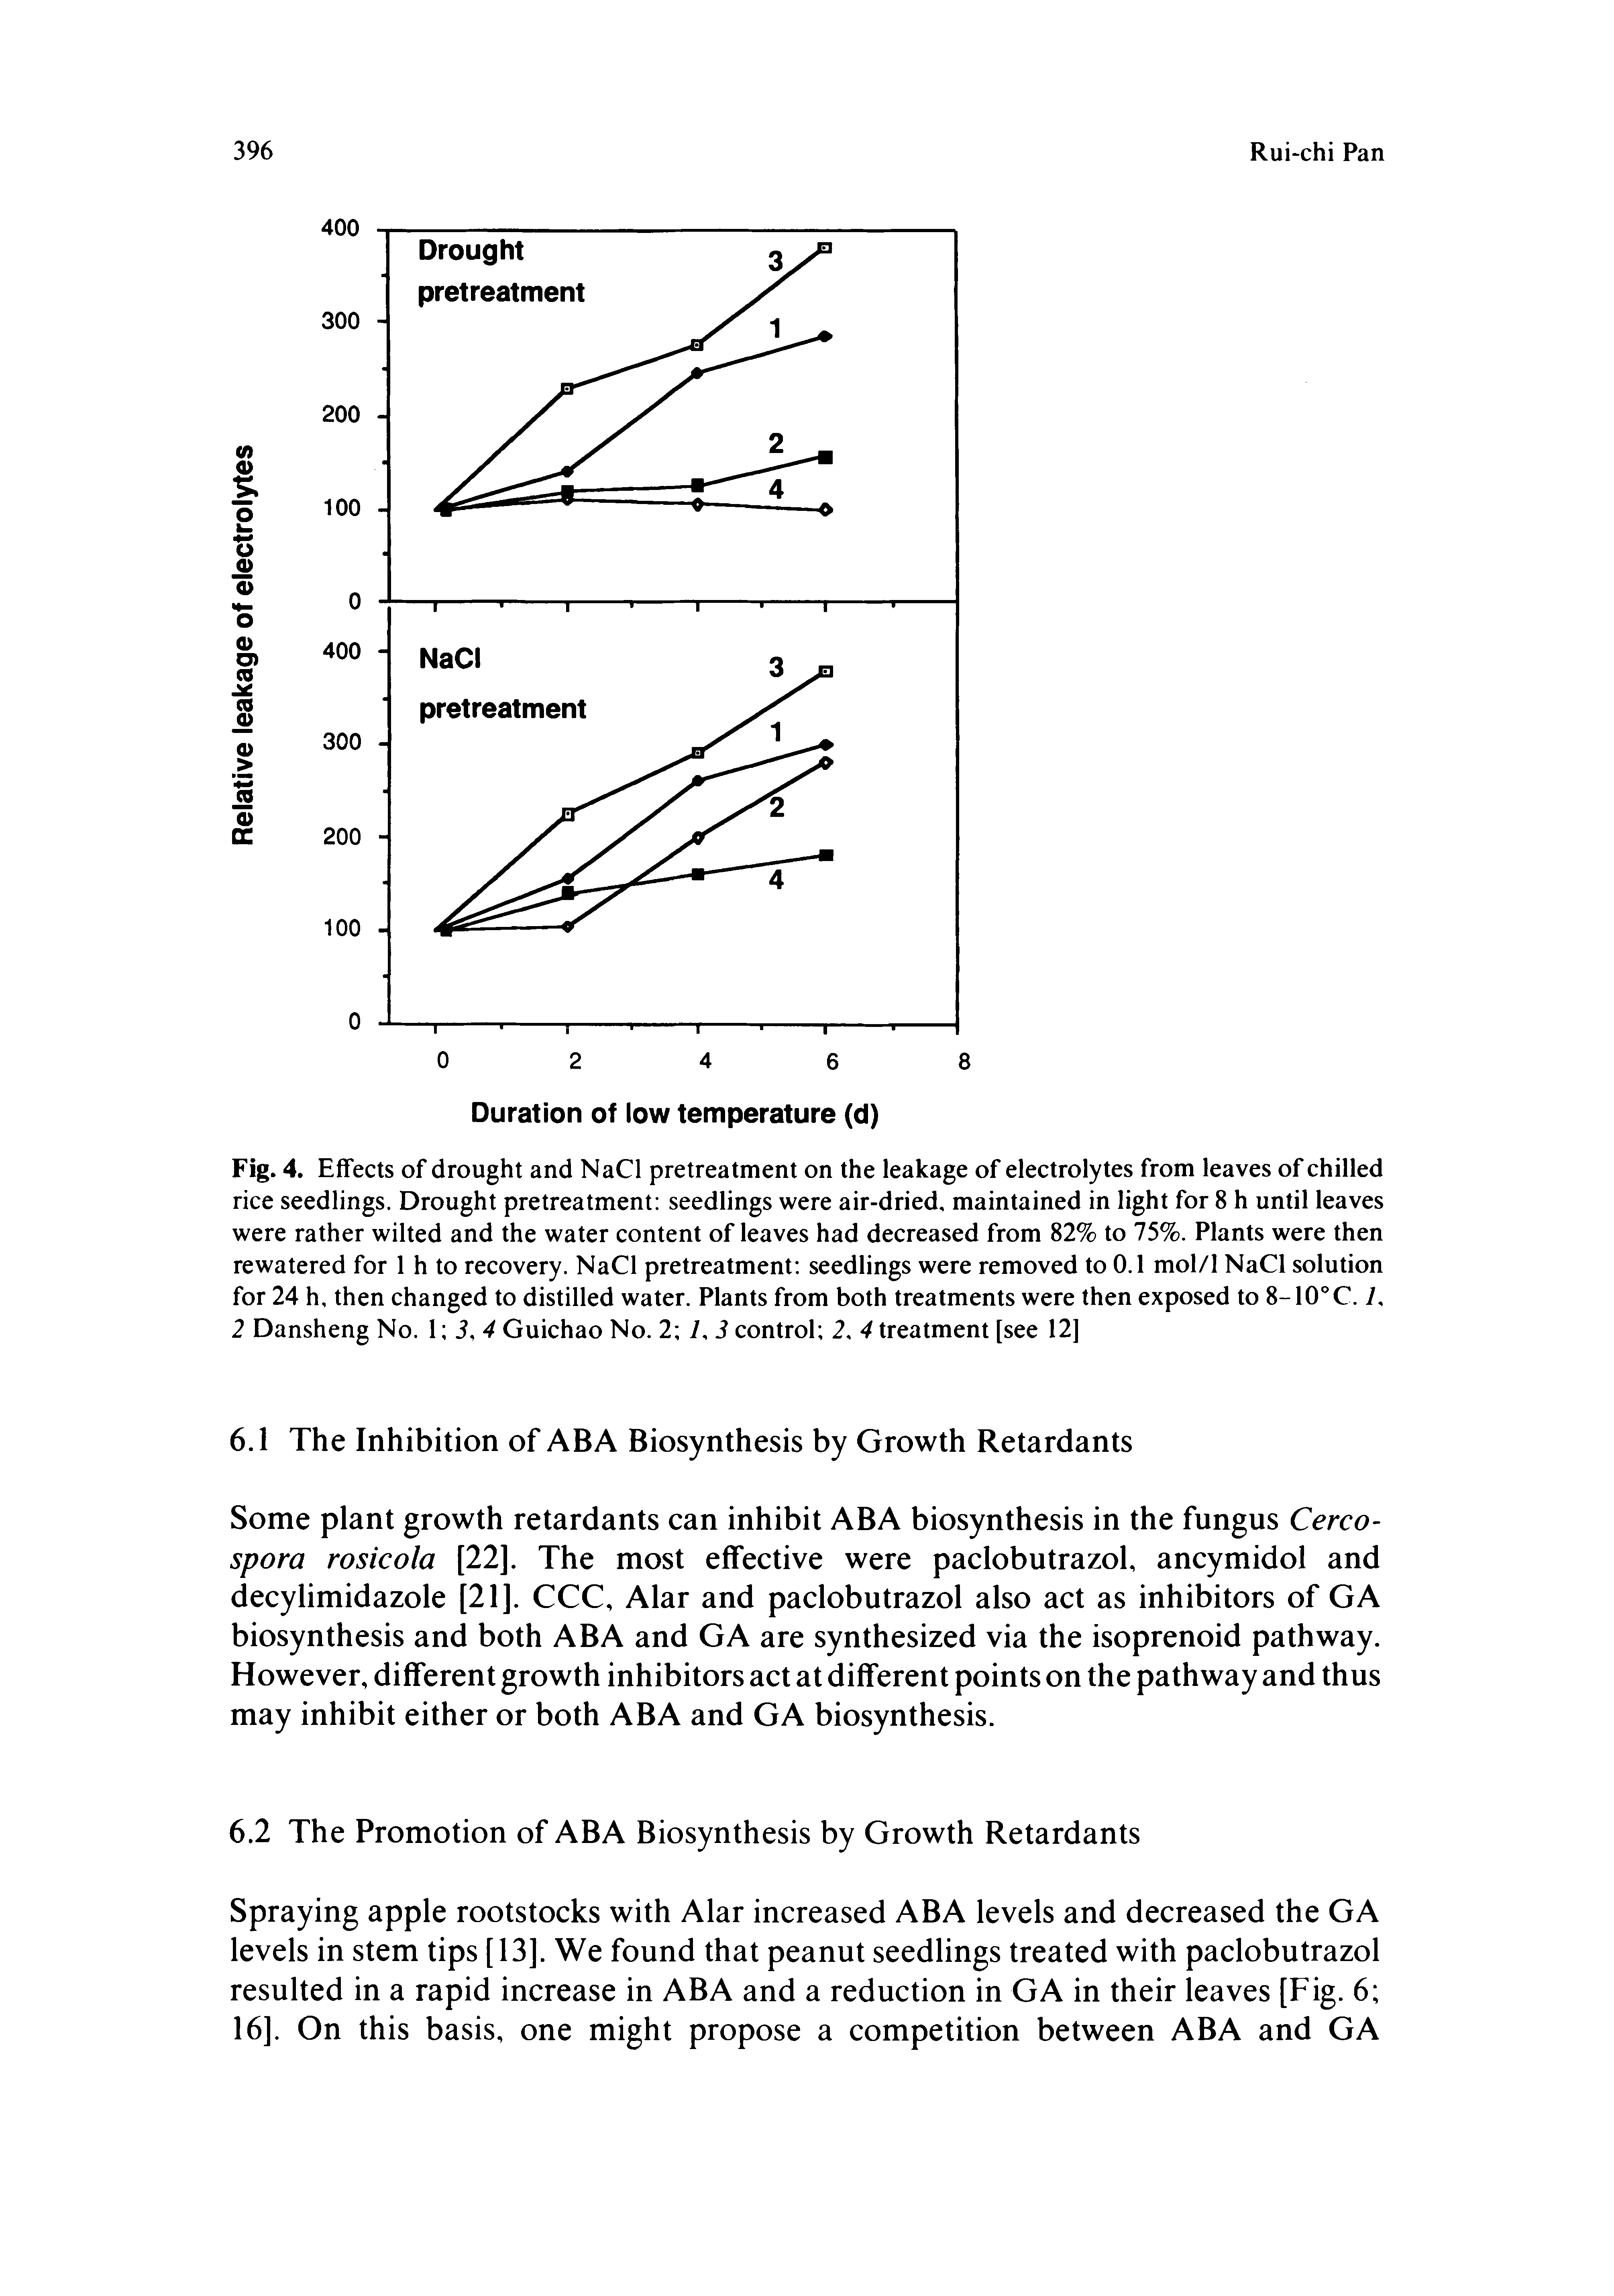 Fig. 4. Effects of drought and NaCl pretreatment on the leakage of electrolytes from leaves of chilled rice seedlings. Drought pretreatment seedlings were air-dried, maintained in light for 8 h until leaves were rather wilted and the water content of leaves had decreased from 82% to 75%. Plants were then rewatered for 1 h to recovery. NaCl pretreatment seedlings were removed to 0.1 mol/1 NaCl solution for 24 h, then changed to distilled water. Plants from both treatments were then exposed to 8-10 C. /, 2 Dansheng No. 3,4 Guichao No. 2 7, 3 control 2, 4 treatment [see 12]...